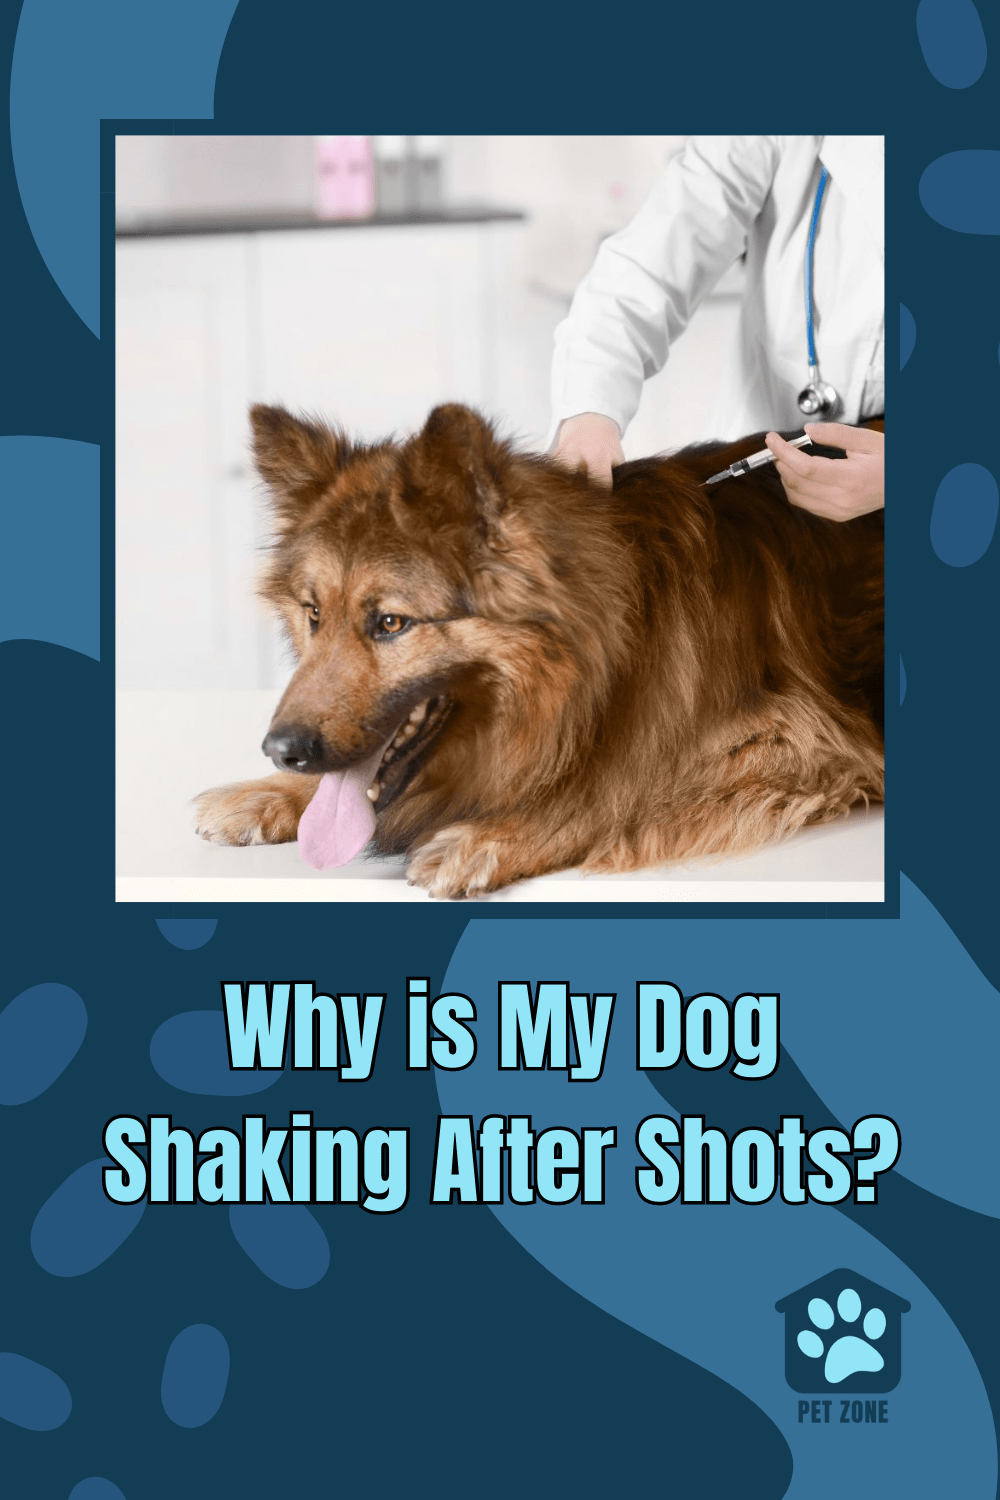 Why is My Dog Shaking After Shots?